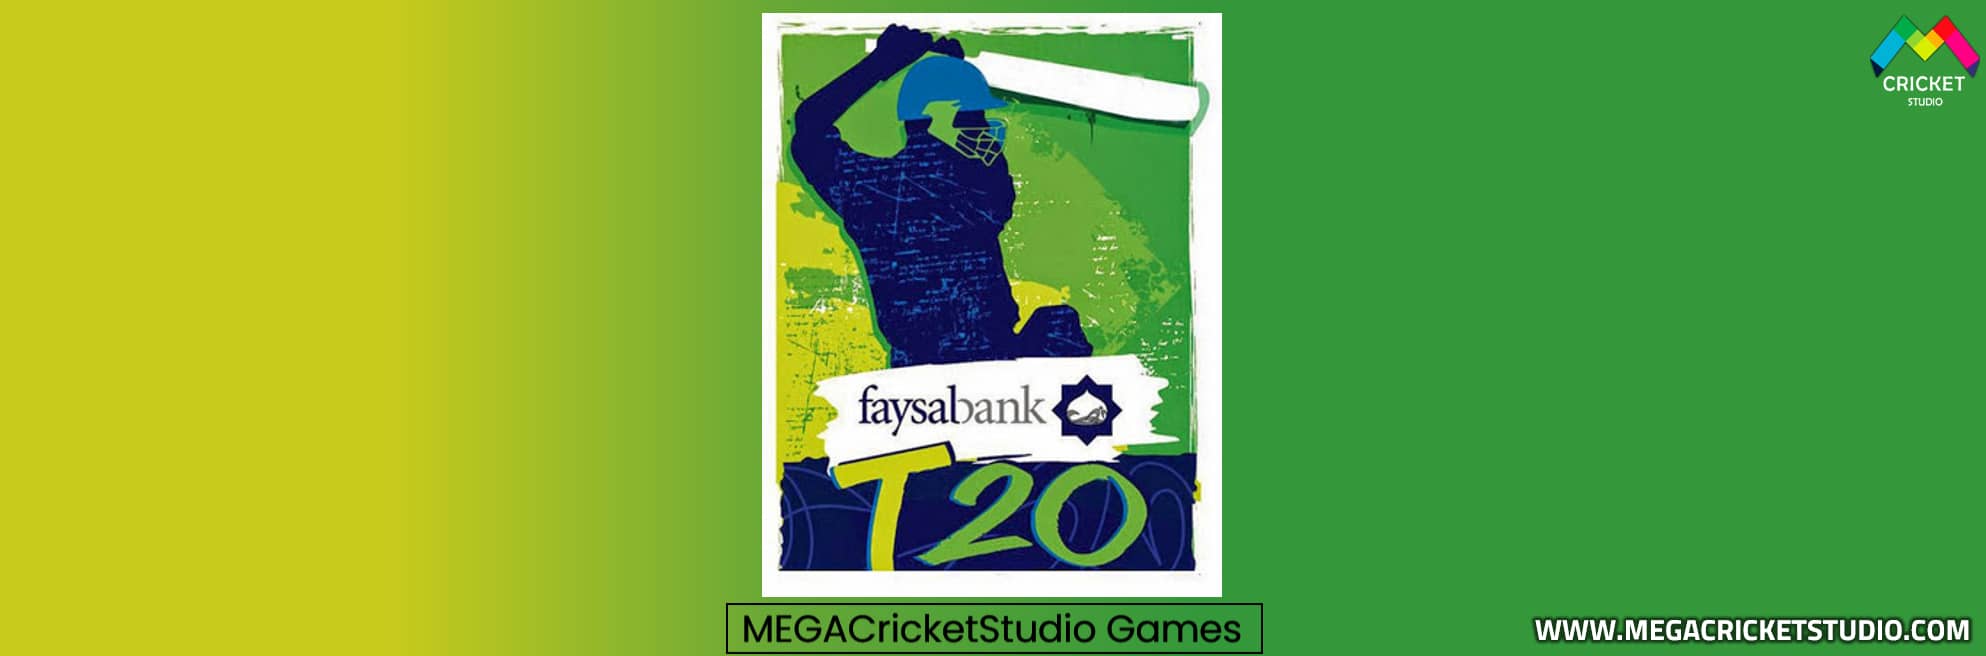 FAYSAL BANK T20 2010 Patch for EA Cricket 07